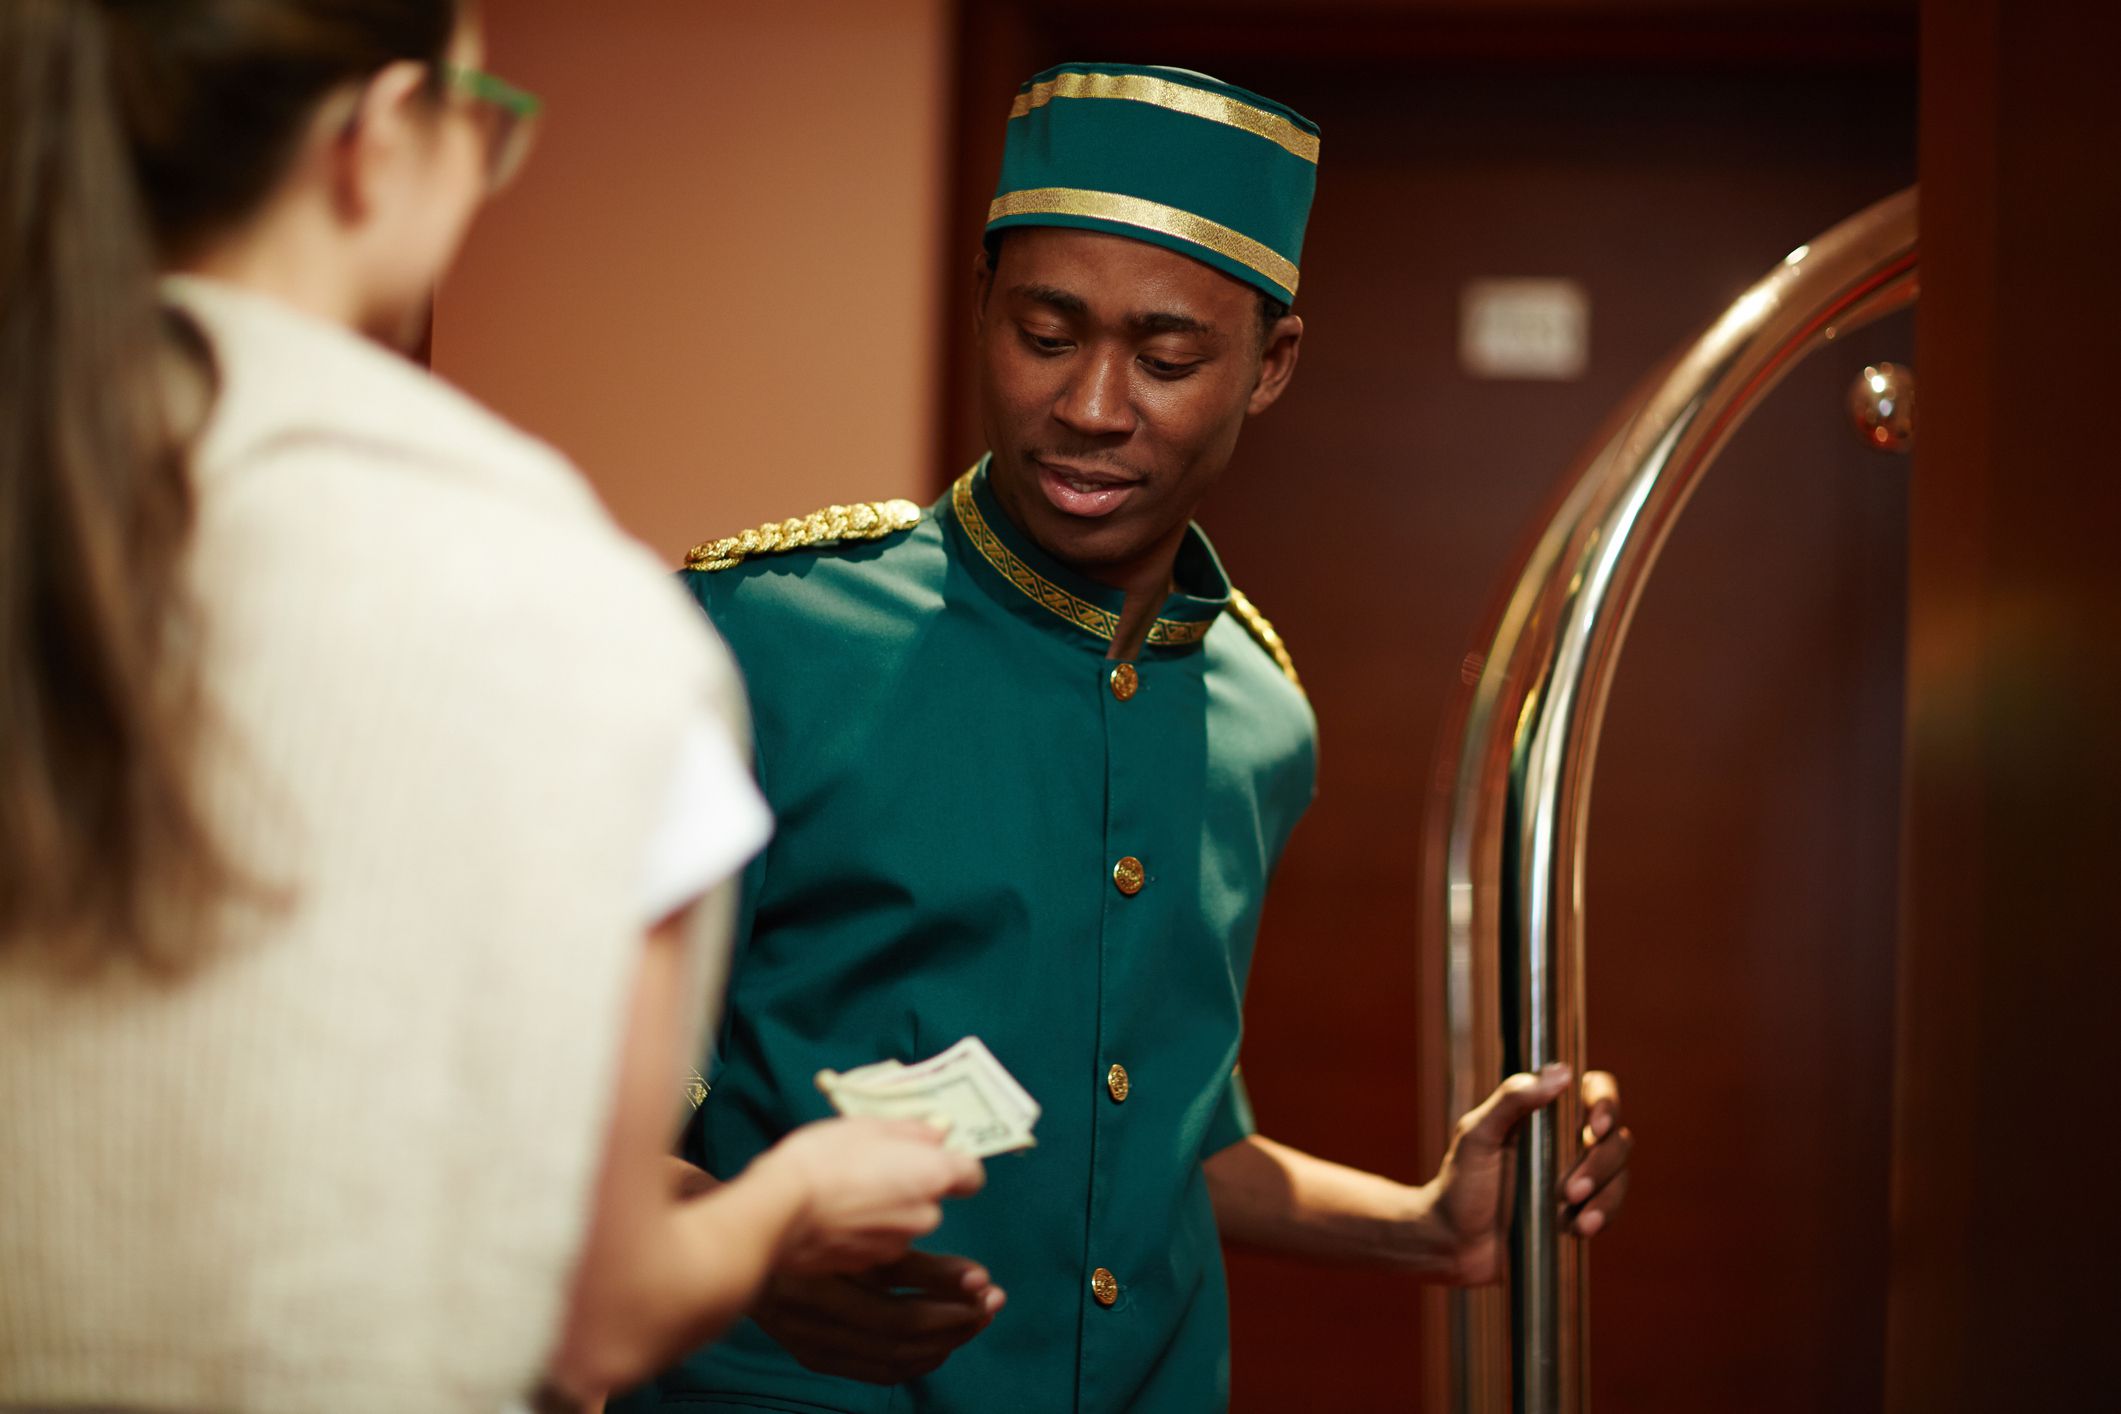 <p>An often-overlooked aspect of hotel etiquette is the <a href="https://blog.cheapism.com/tipping-rules/">practice of tipping</a>. For hotel staff, including housekeepers, bellhops, and concierge services, it means a lot for guests to recognize their hard work. Tipping is not just a gesture of appreciation but also an acknowledgment of their dedicated service. </p><p>Generally, you can expect to tip housekeeping about $3 or $5 each day, bellhops for helping with luggage, and concierge staff if they go above and beyond like helping you secure hard-to-get reservations. </p><div class="rich-text"><p>This article was originally published on <a href="https://blog.cheapism.com/things-you-should-never-do-hotel-room/">Cheapism</a></p></div>